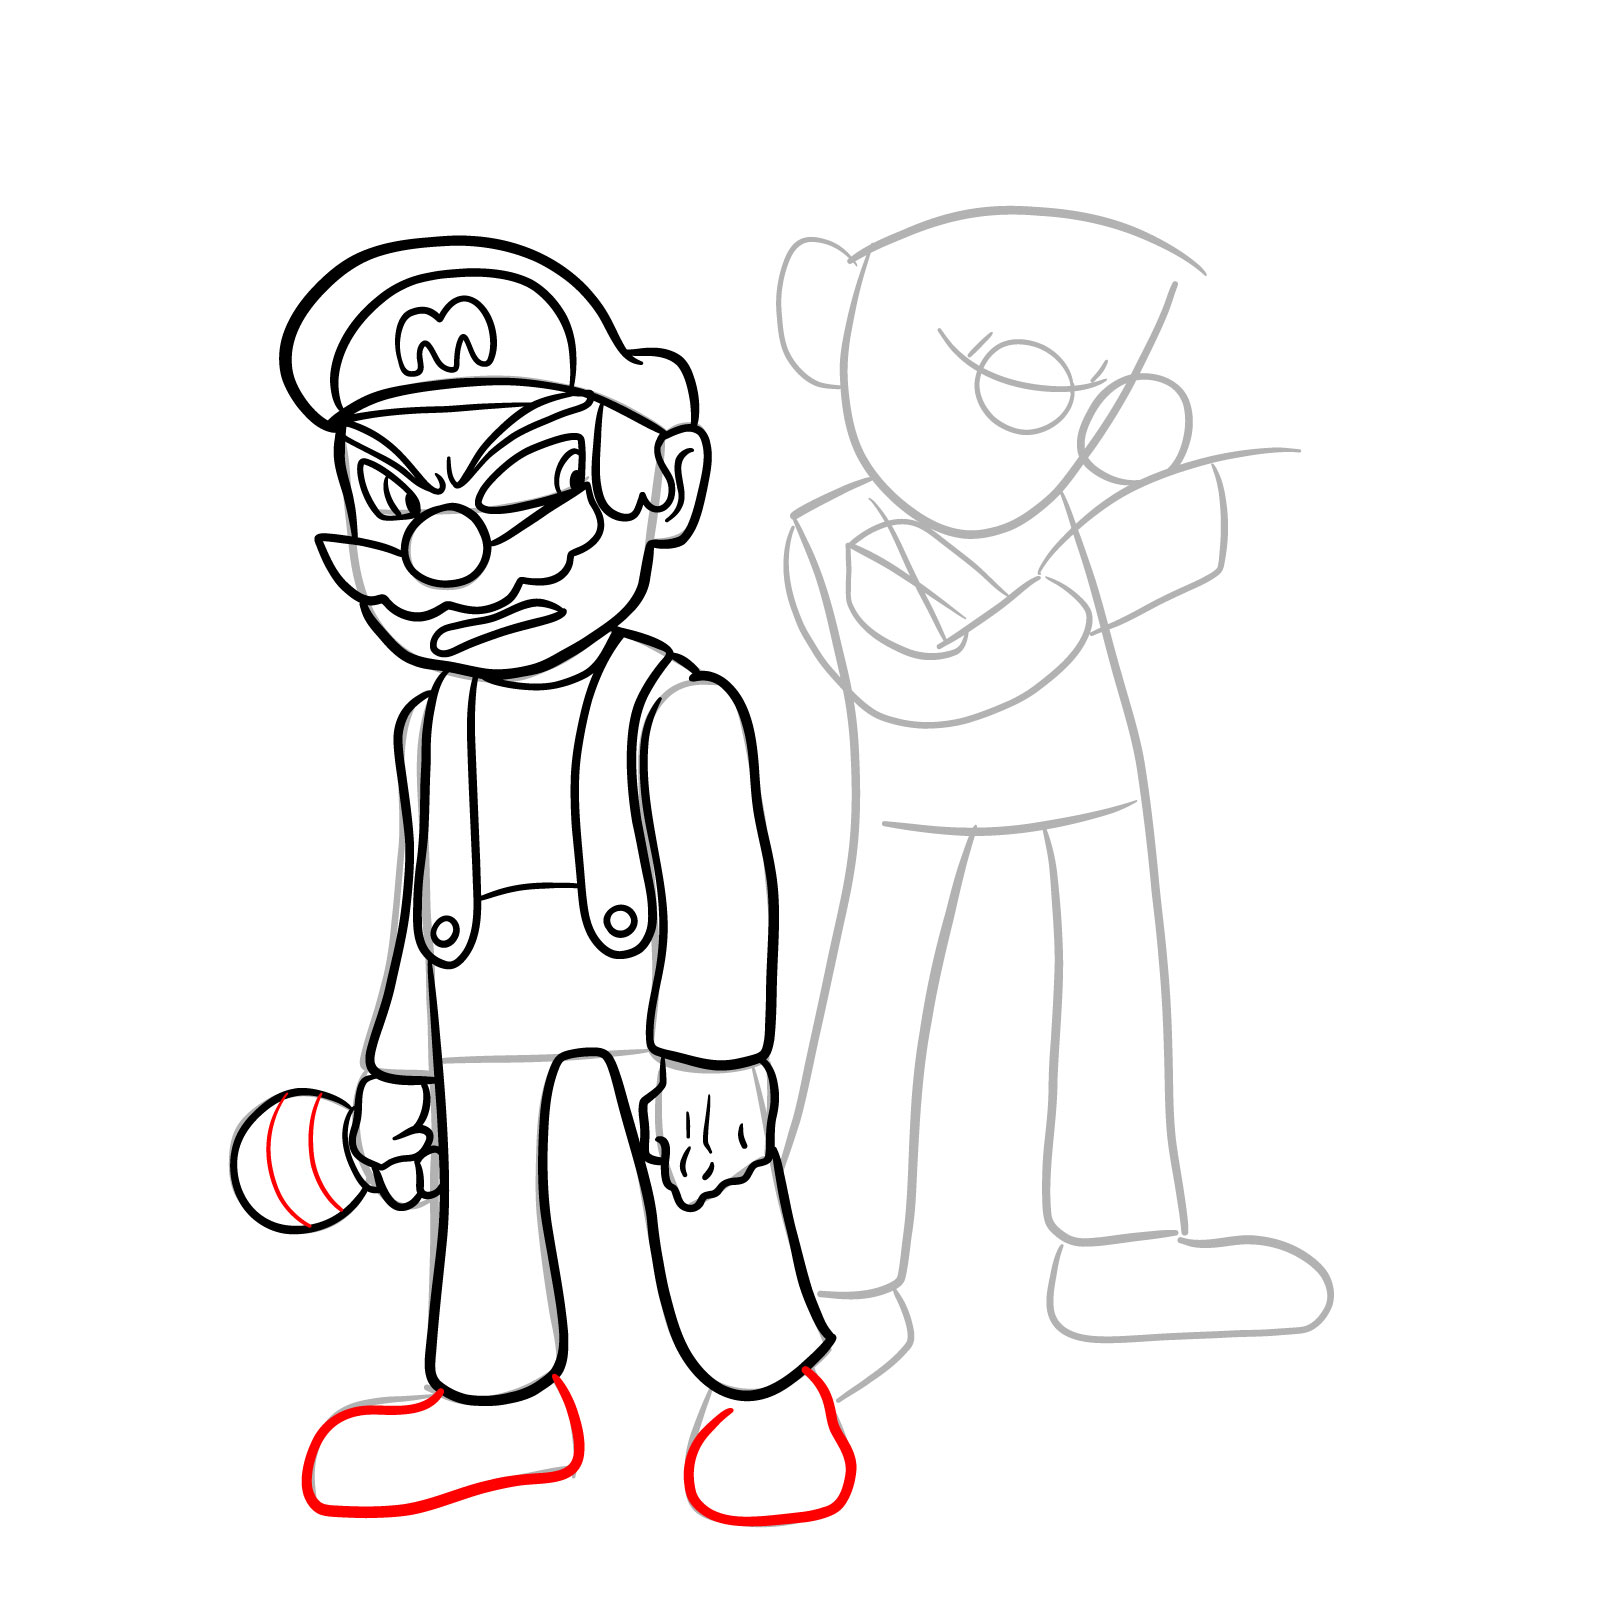 How to draw Mario and Luigi from Tails Gets Trolled - step 21